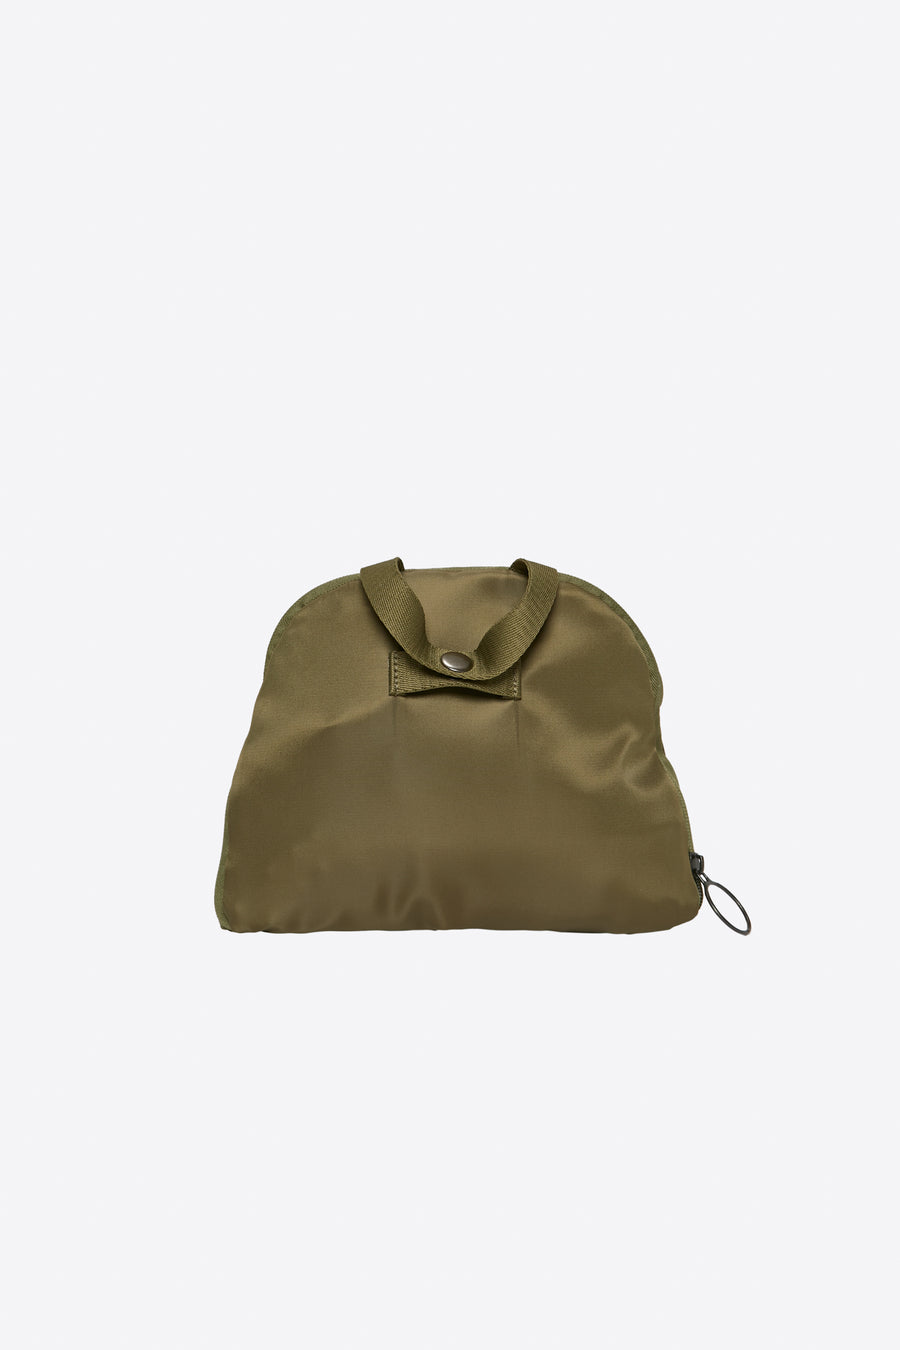 Sydney Backpack - Nettle/Unbleached